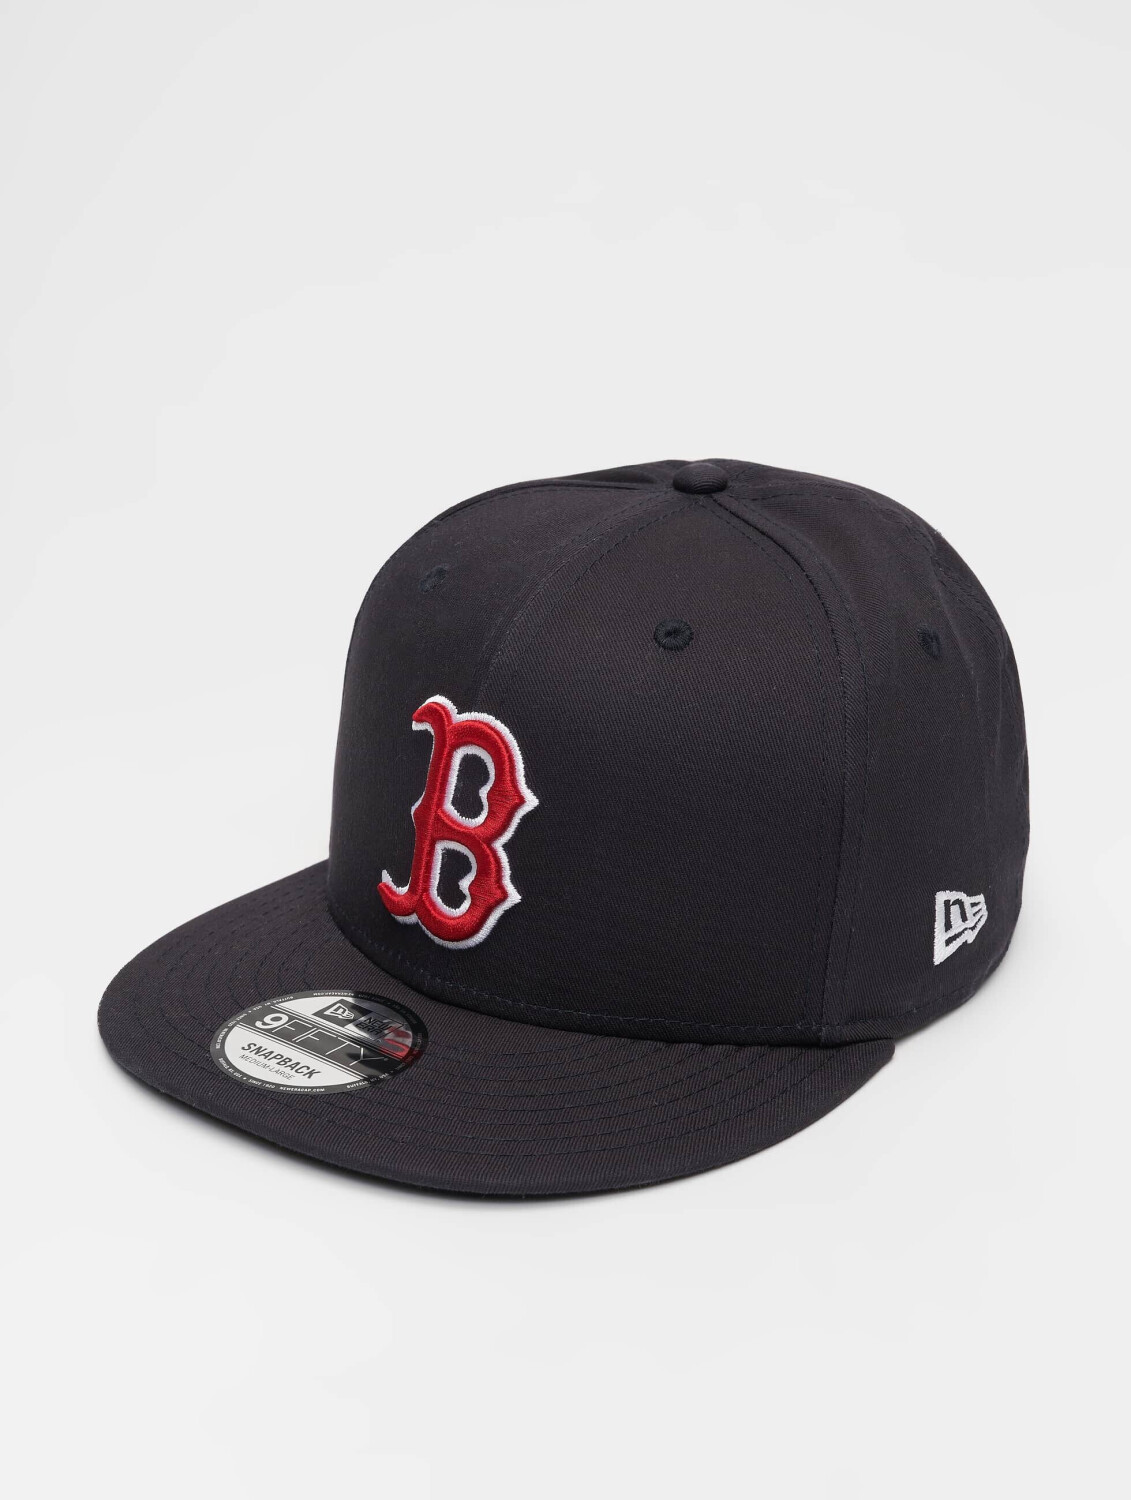 Buy New Era Snapback Cap MLB 9Fifty Boston Red Sox Team Colour black  (10531956) from £20.00 (Today) – Best Deals on